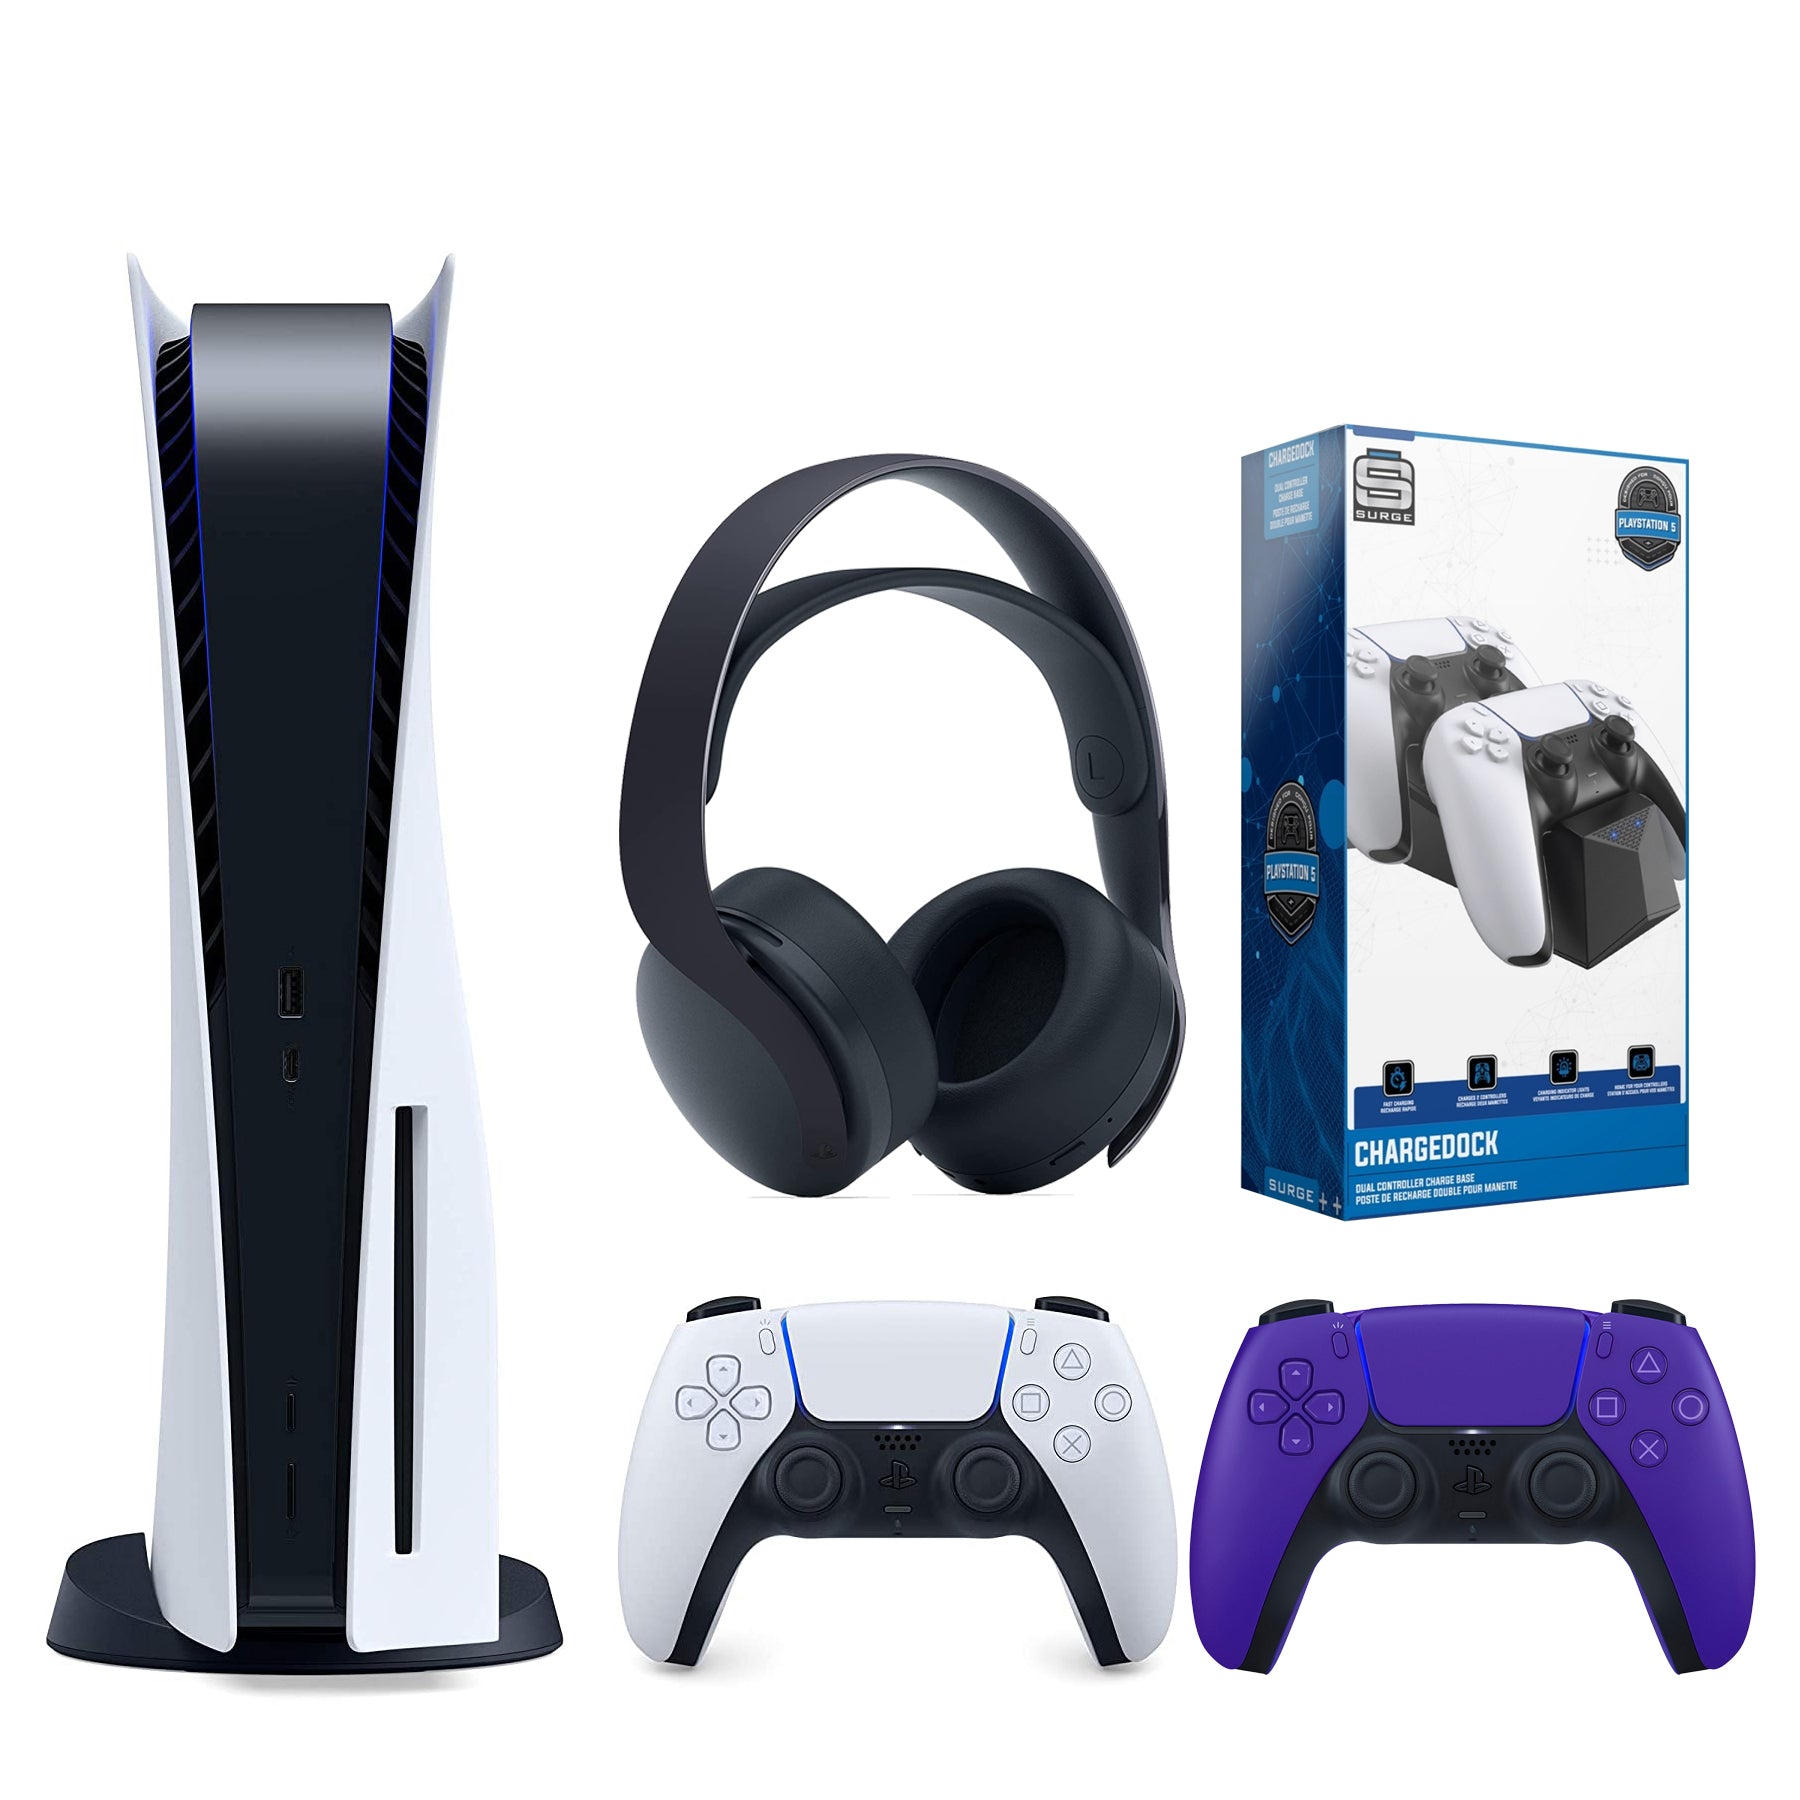 Sony Playstation 5 Disc Version (Sony PS5 Disc) with Extra Galactic Purple Controller, Black PULSE 3D Headset and Dual Charging Station Bundle - Pro-Distributing